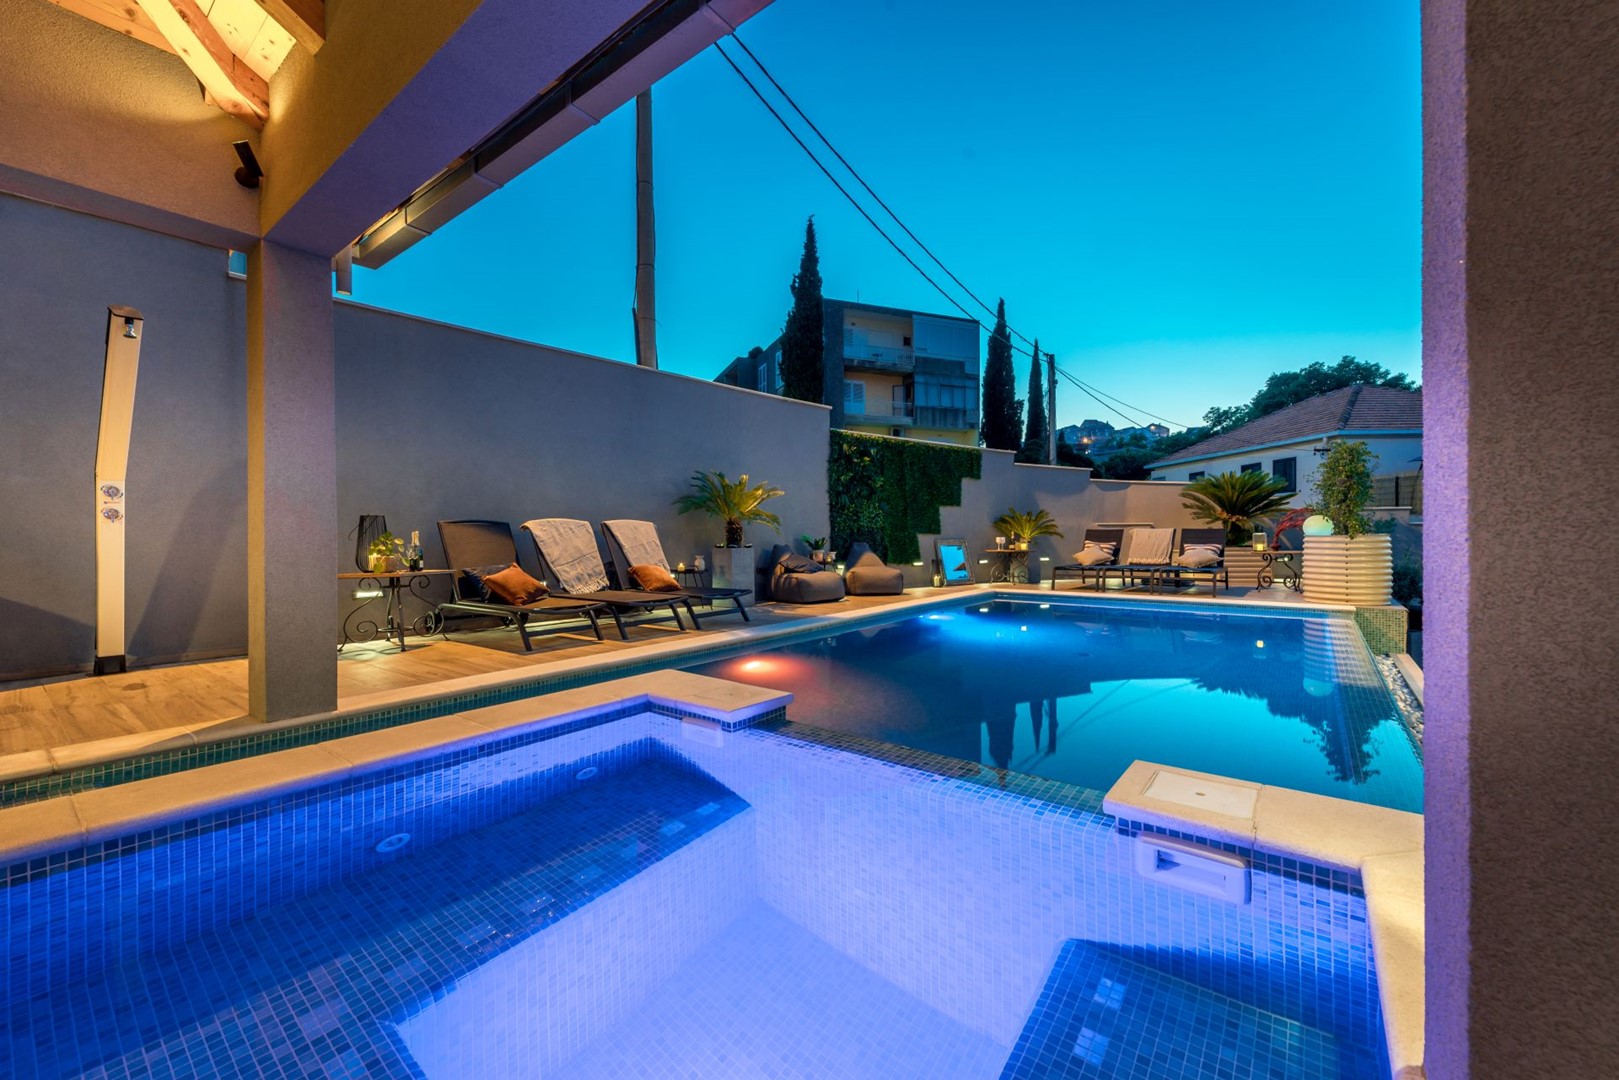 Luxury villa Lapad Entrez in Dubrovnik with outdoor pool and deck chairs